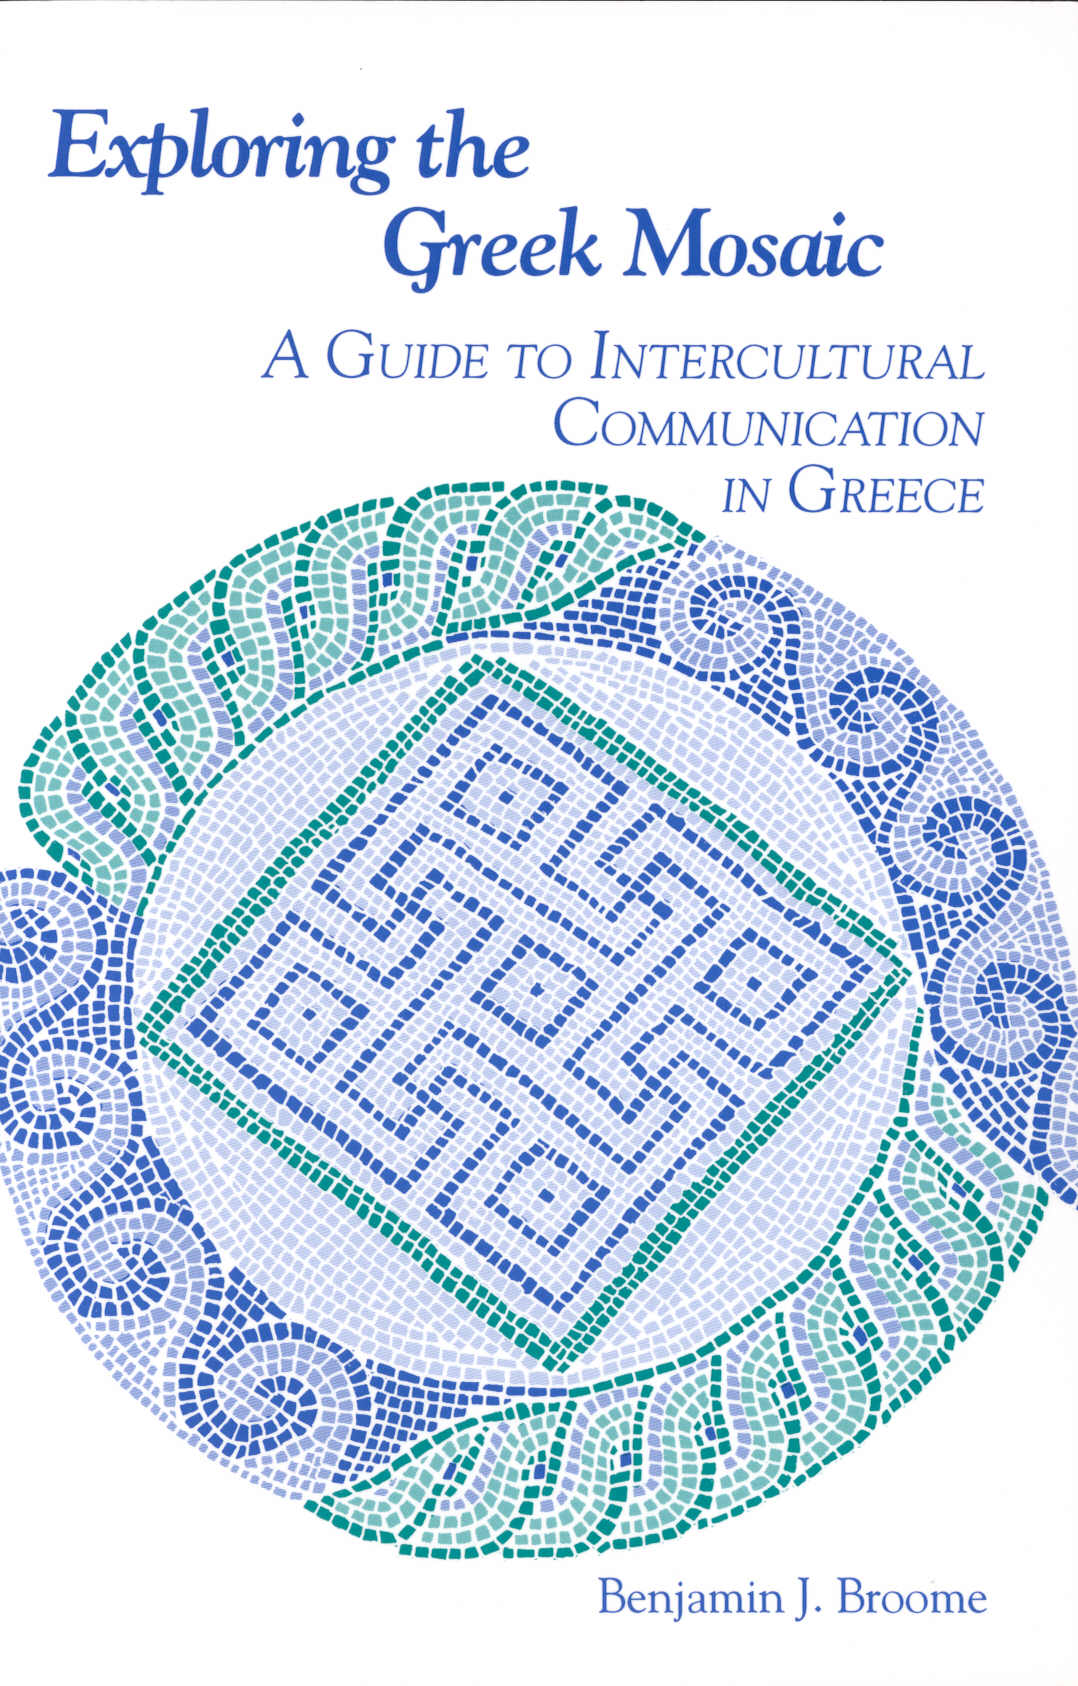 Exploring the Greek Mosaic - Cover Page